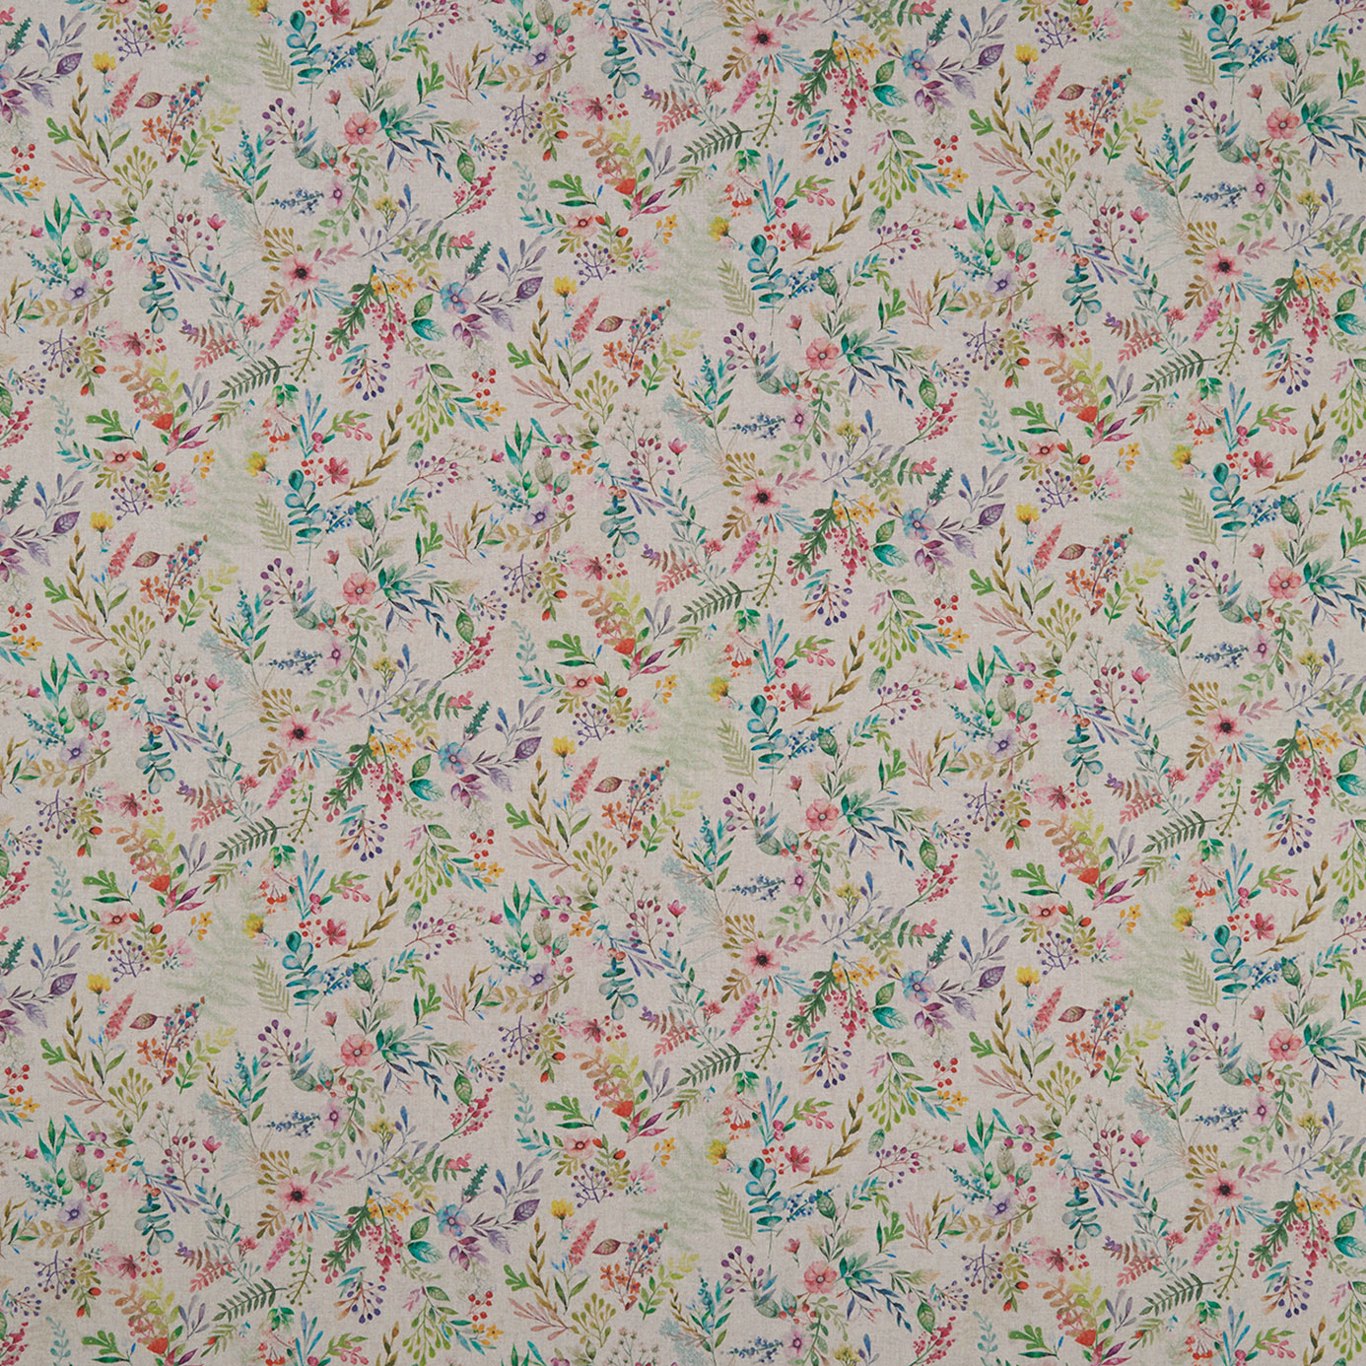 Forget Me Not Fabric